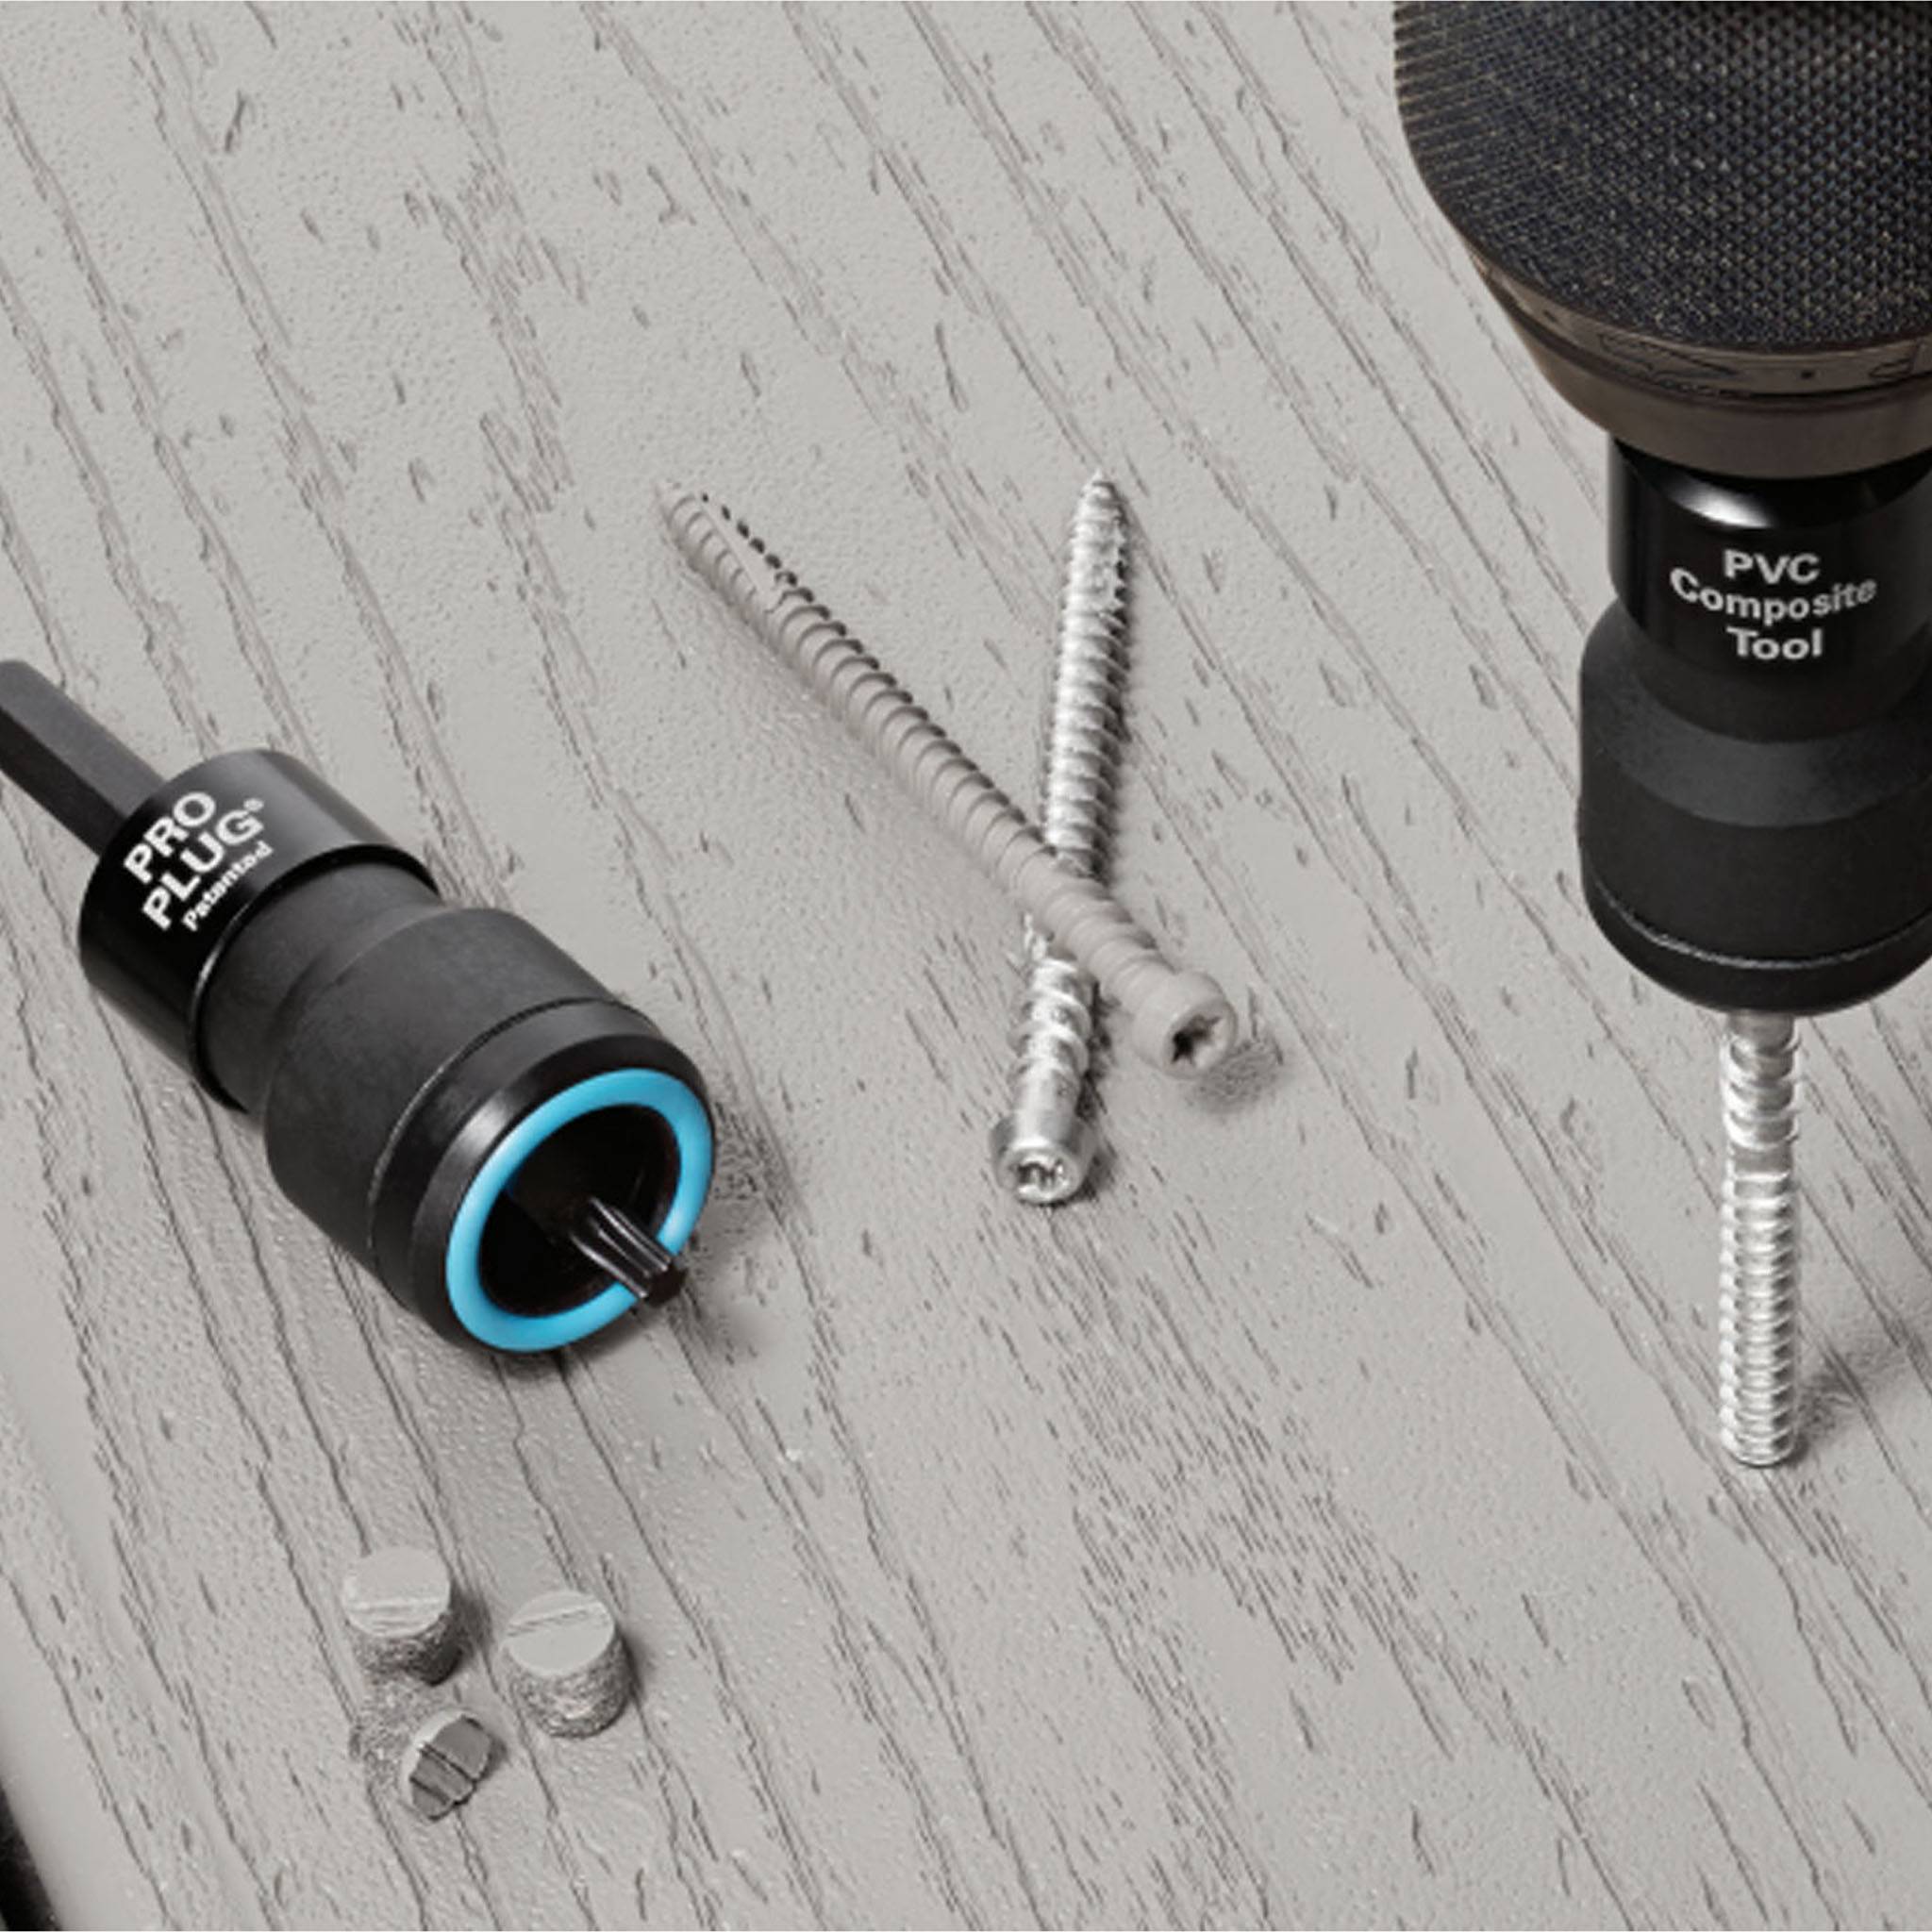 up close shot of the Starborn ProPlug system - with screws, plugs & tool bit